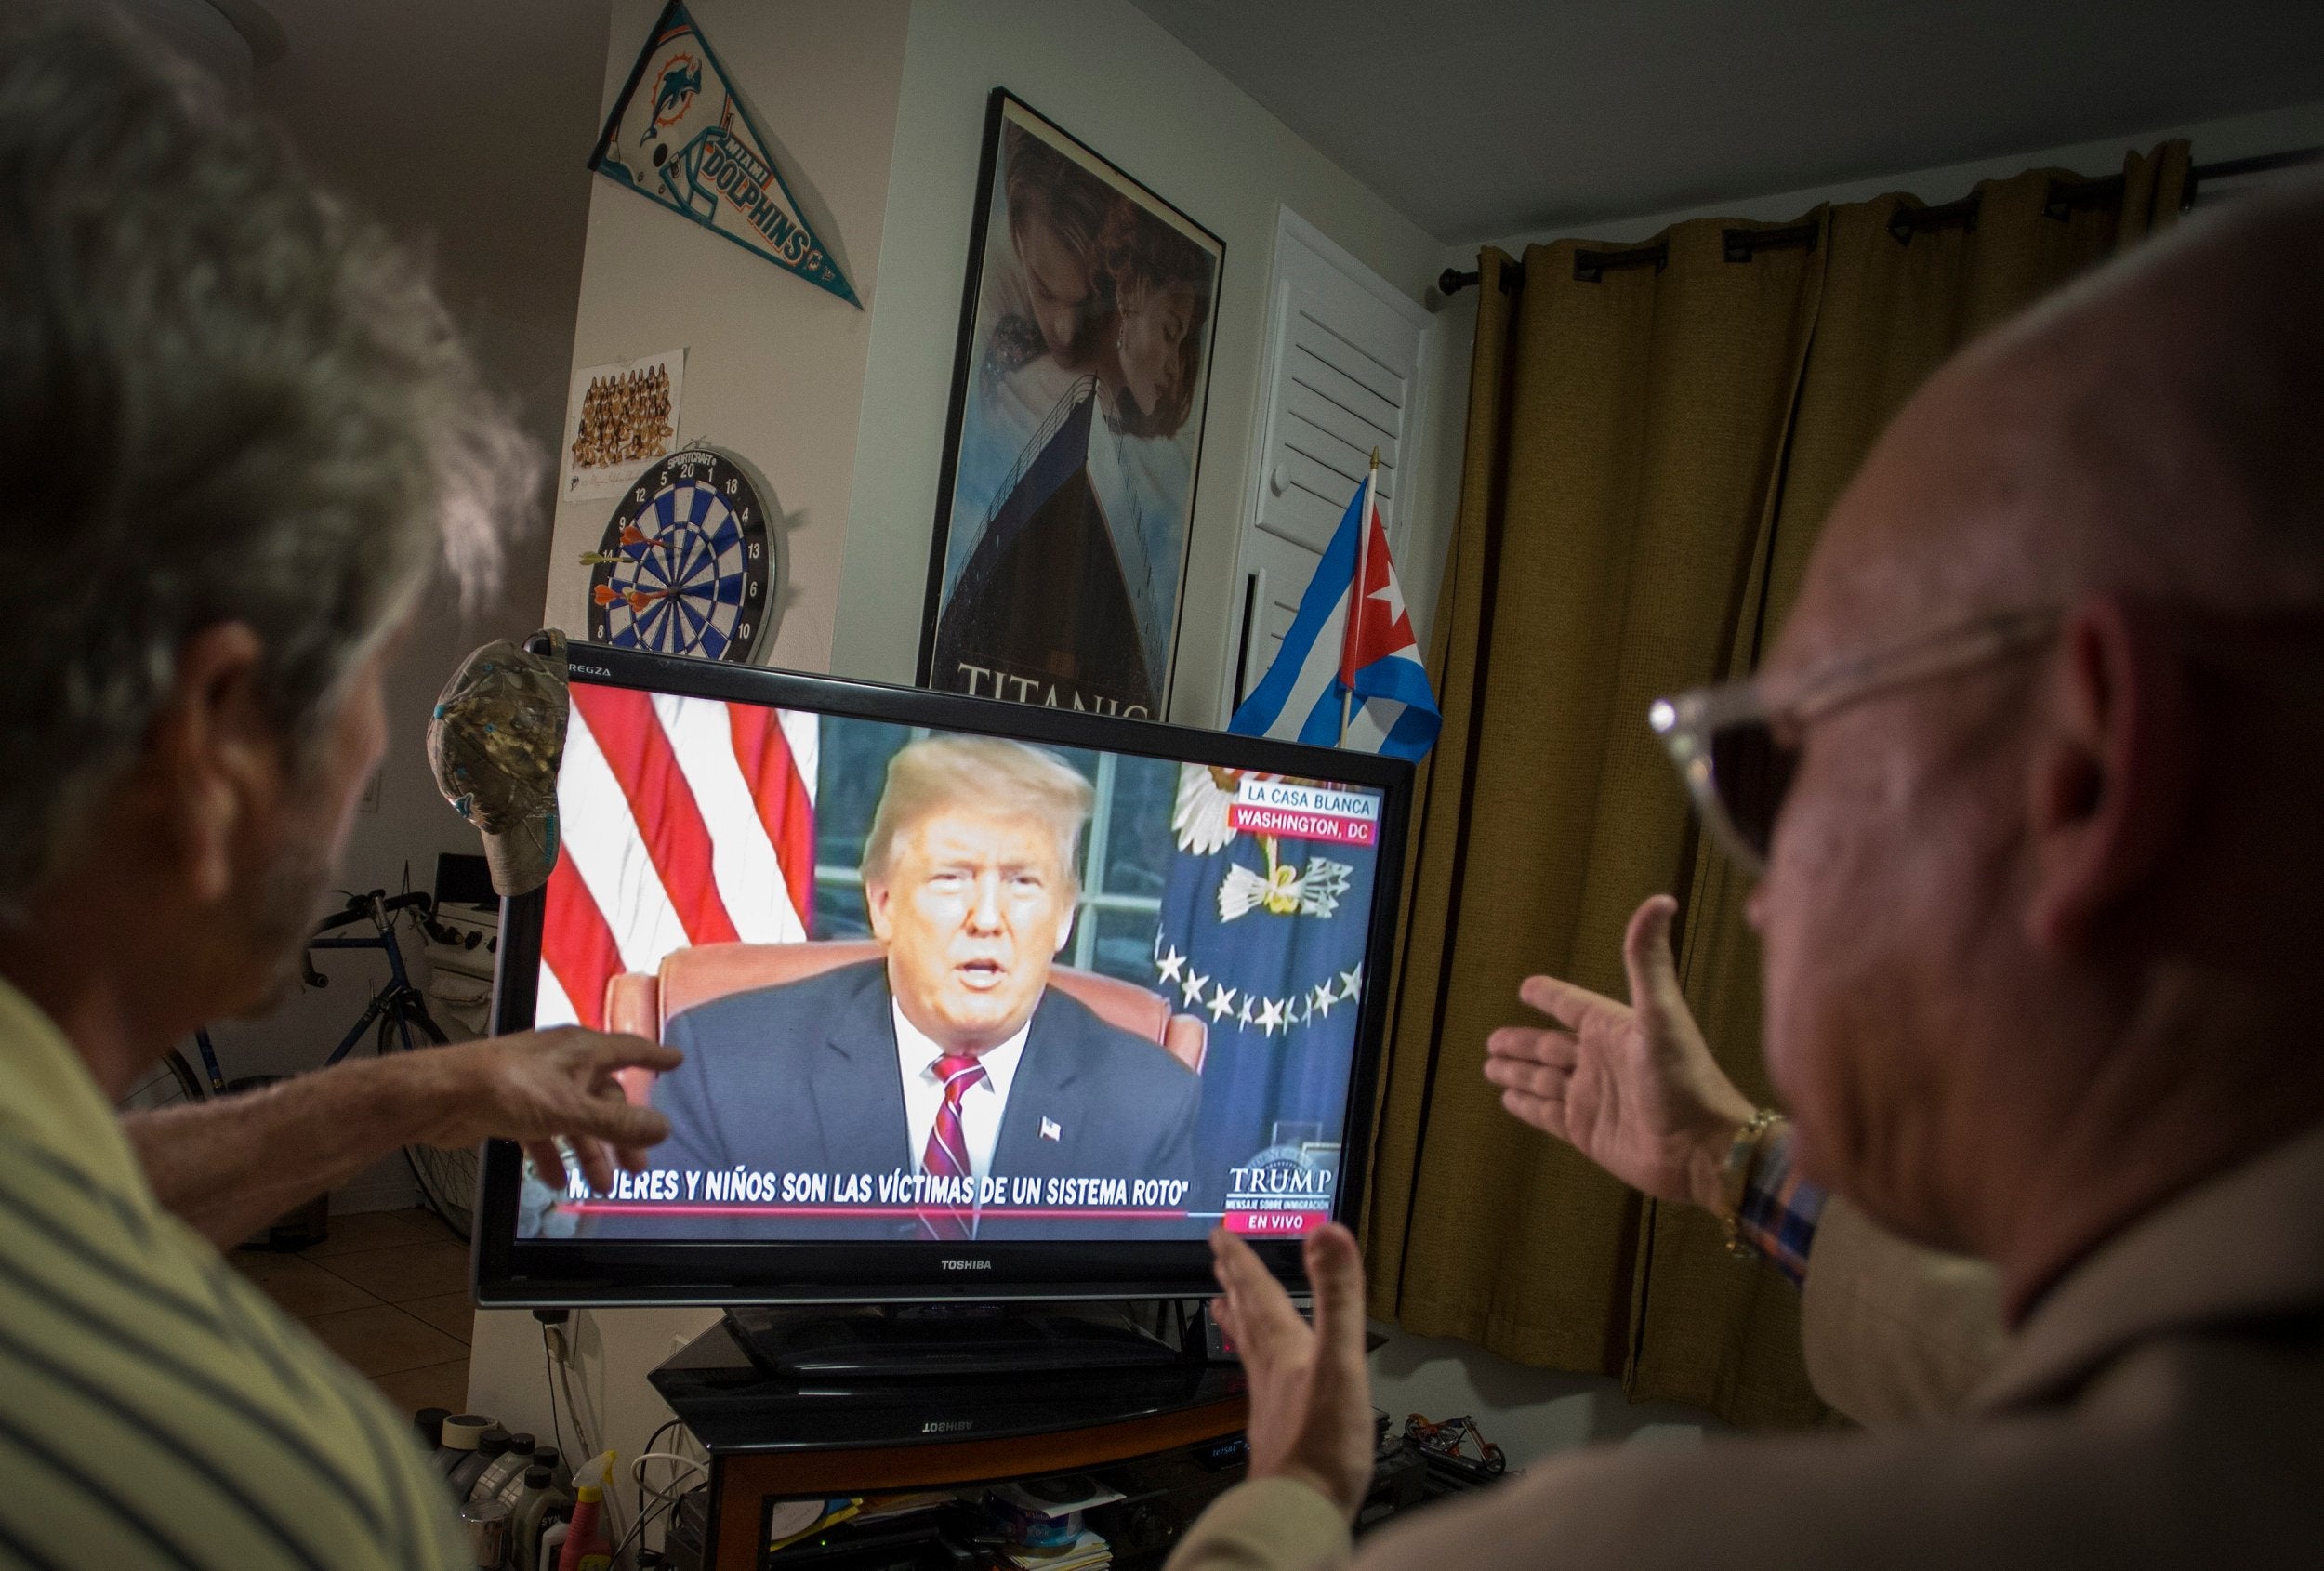 Miguel Saavedra (L) and his friend Oswaldo Hernandez (C) watch President Trump on TV from their home in Miami, Florida